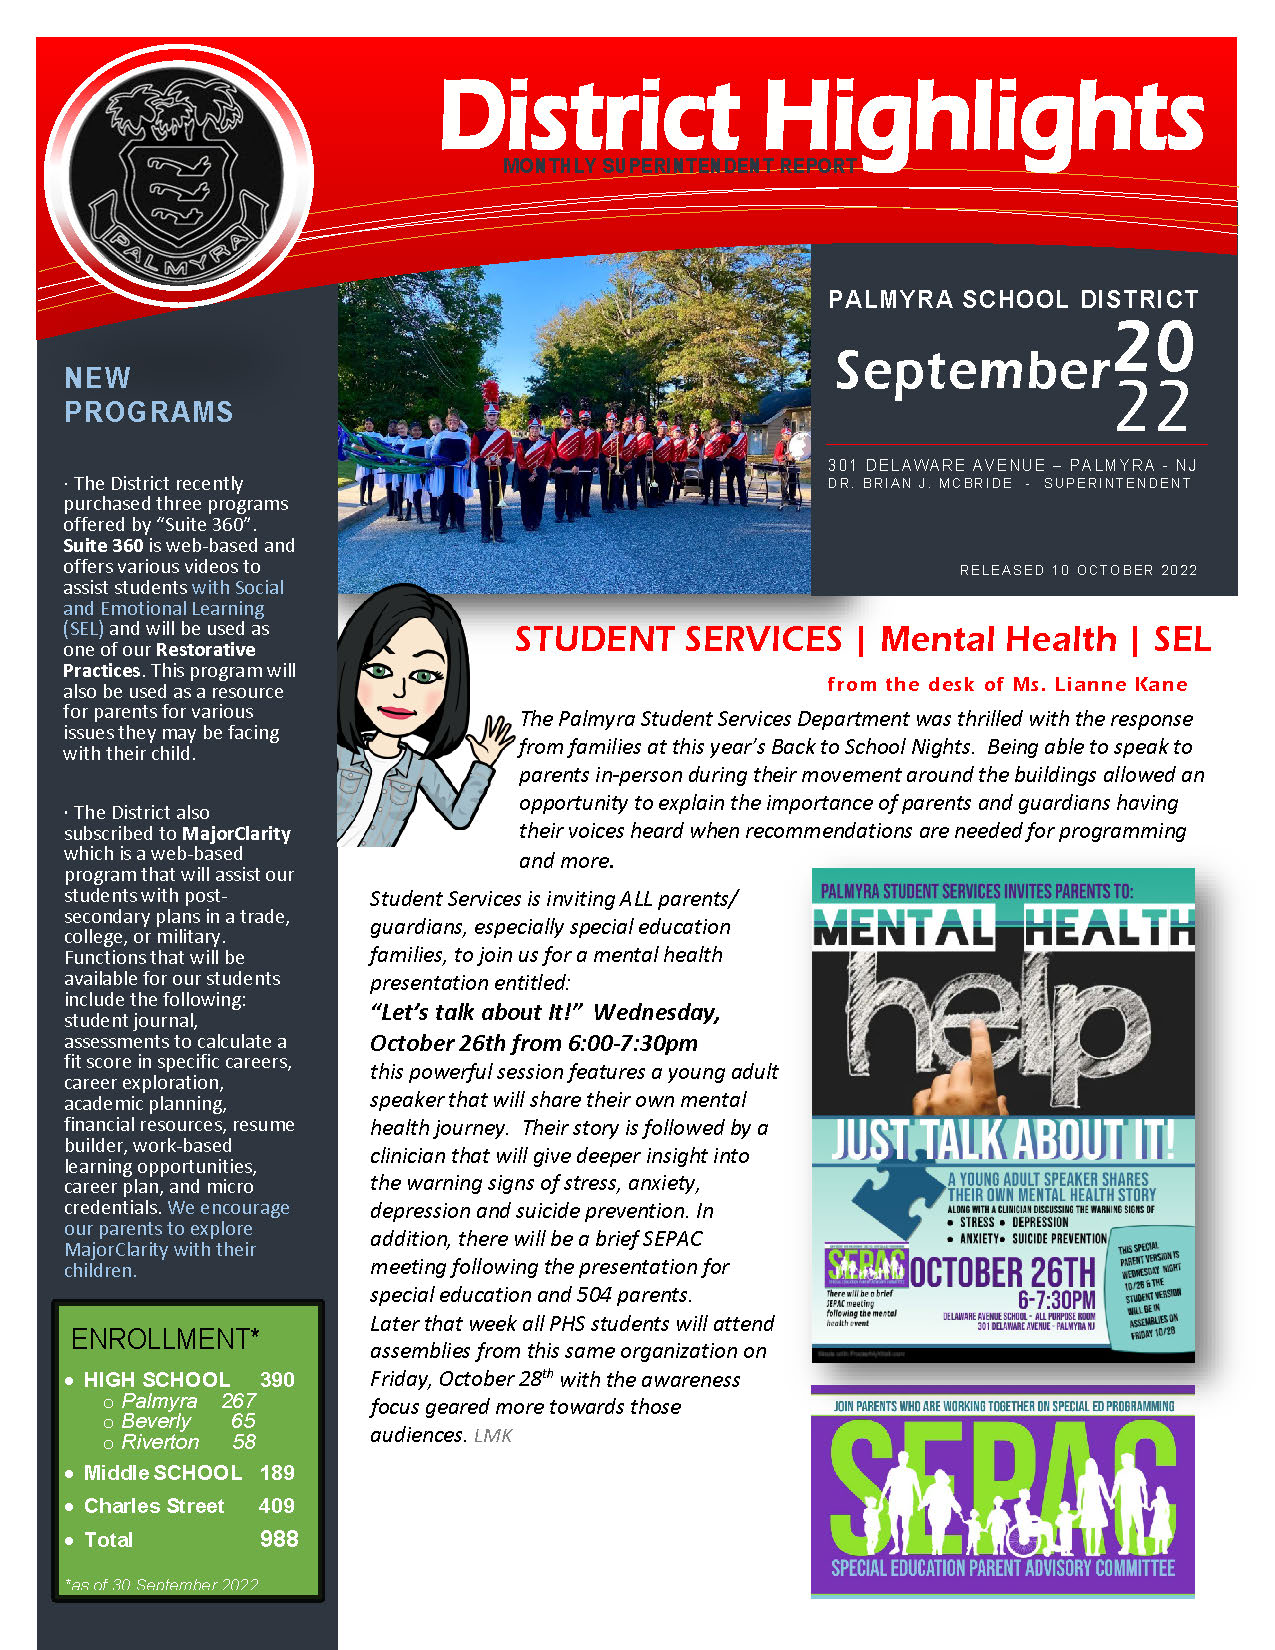 Sept 22 newsletter cover with photo of band